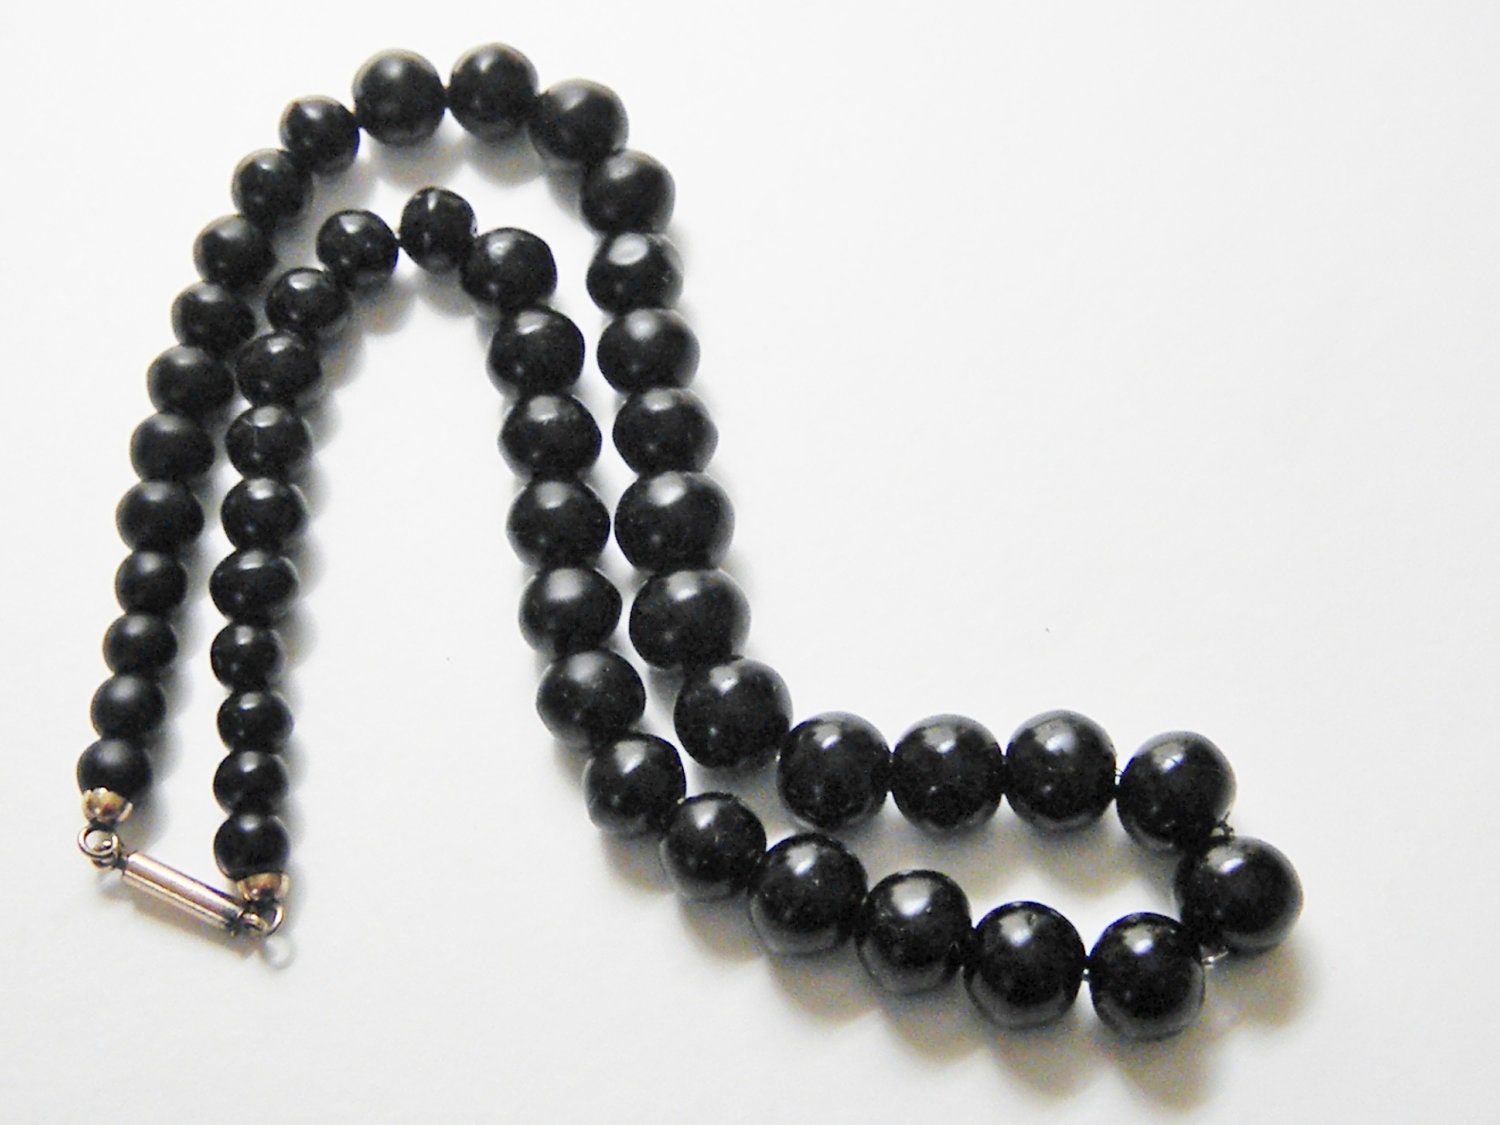 Antique Victorian Whitby Jet Bead Necklace by GrandVintageFinery